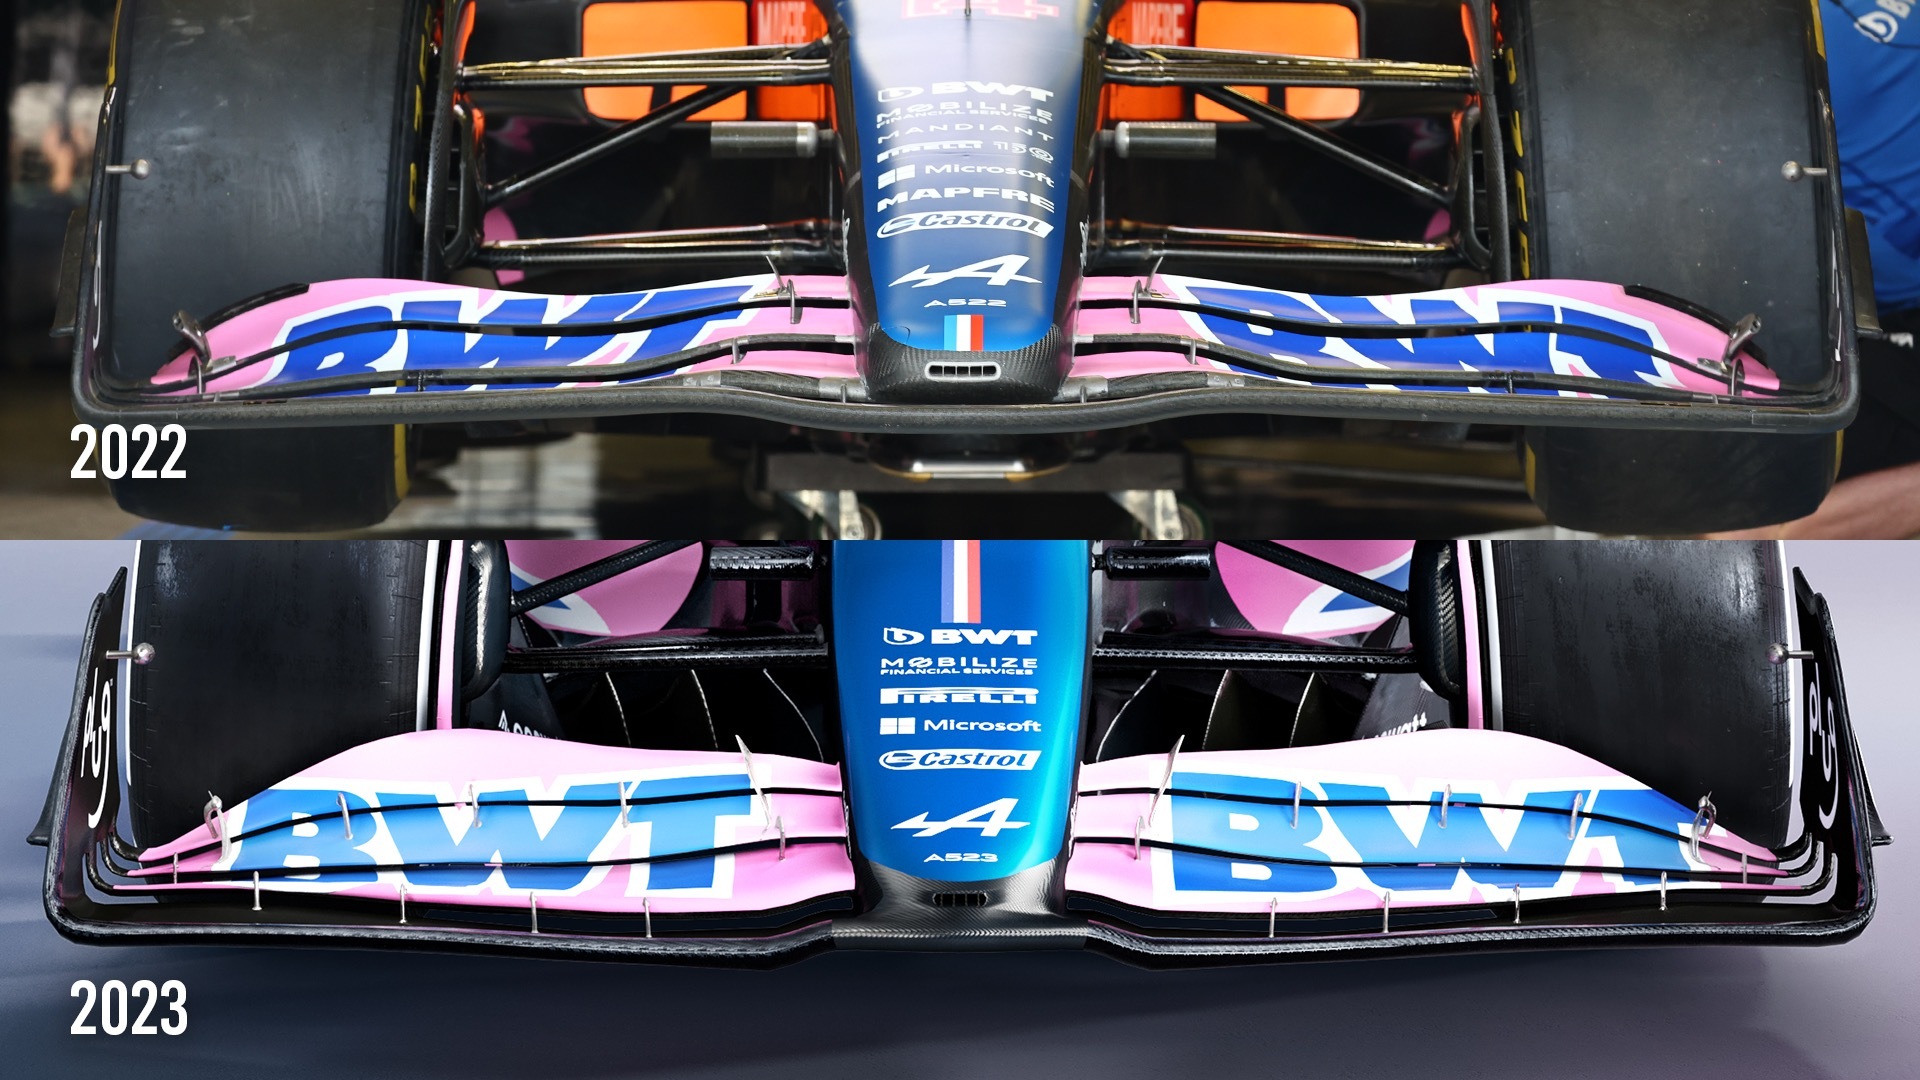 Alpine unveils new A523 at final 2023 F1 car launch